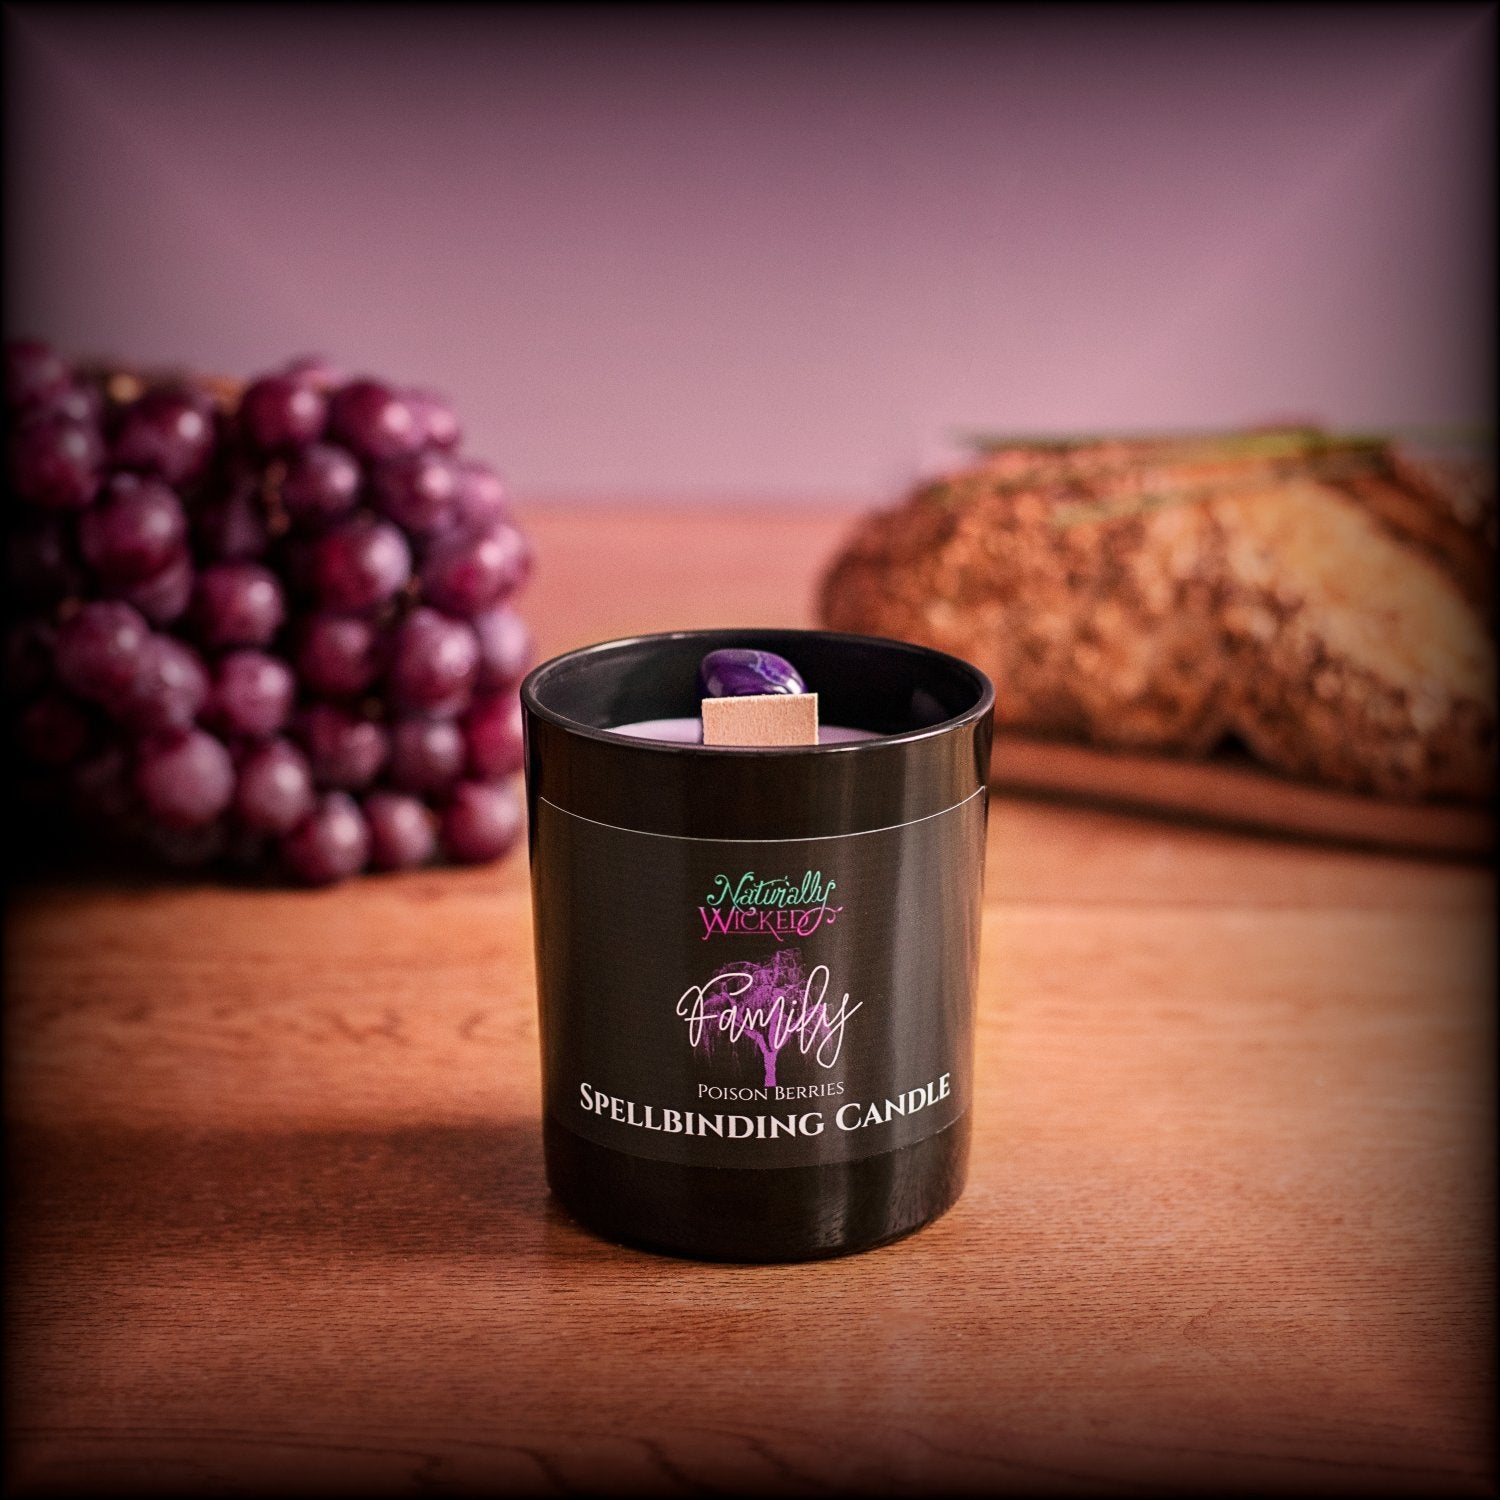 A Scenic View Of The Perfect Spell Candle. Naturally Wicked Spellbinding Family Candle Proudly Presents It's Dark Black Gloss Label With A Poison Berries Purple Family Tree On The Front. The Candle Features Plant-based Smooth Purple Wax, A Wood Wick And A Purple Agate Crystal. Perfect For All The Family